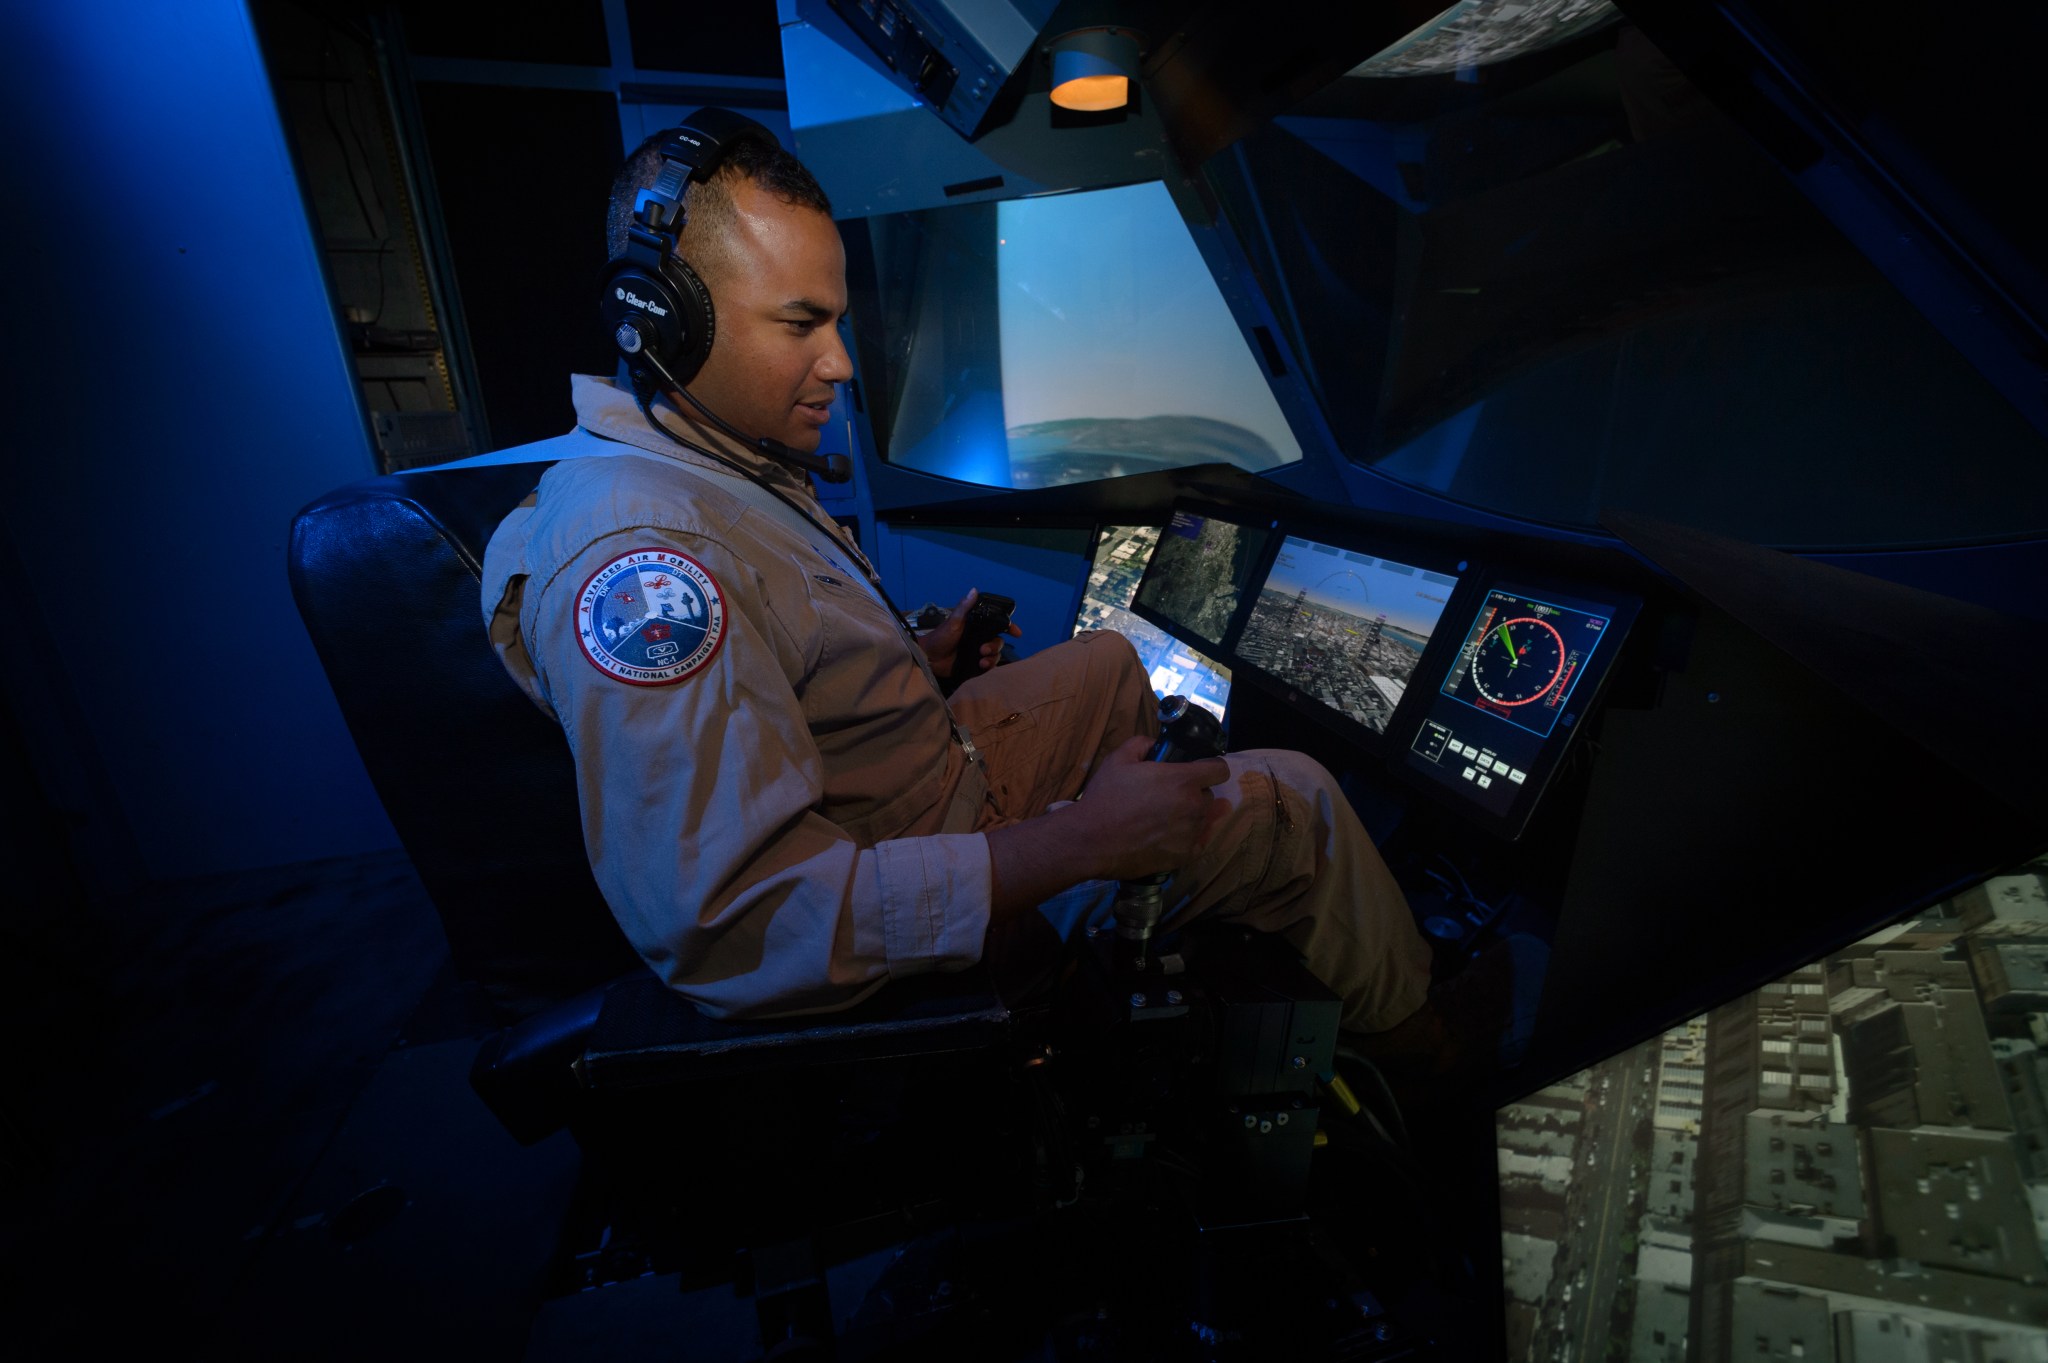 A man wearing a tan flight suit flies in a blue-lit flight simulator. Navigation guidance and other controls light up the simulator’s front dashboard.